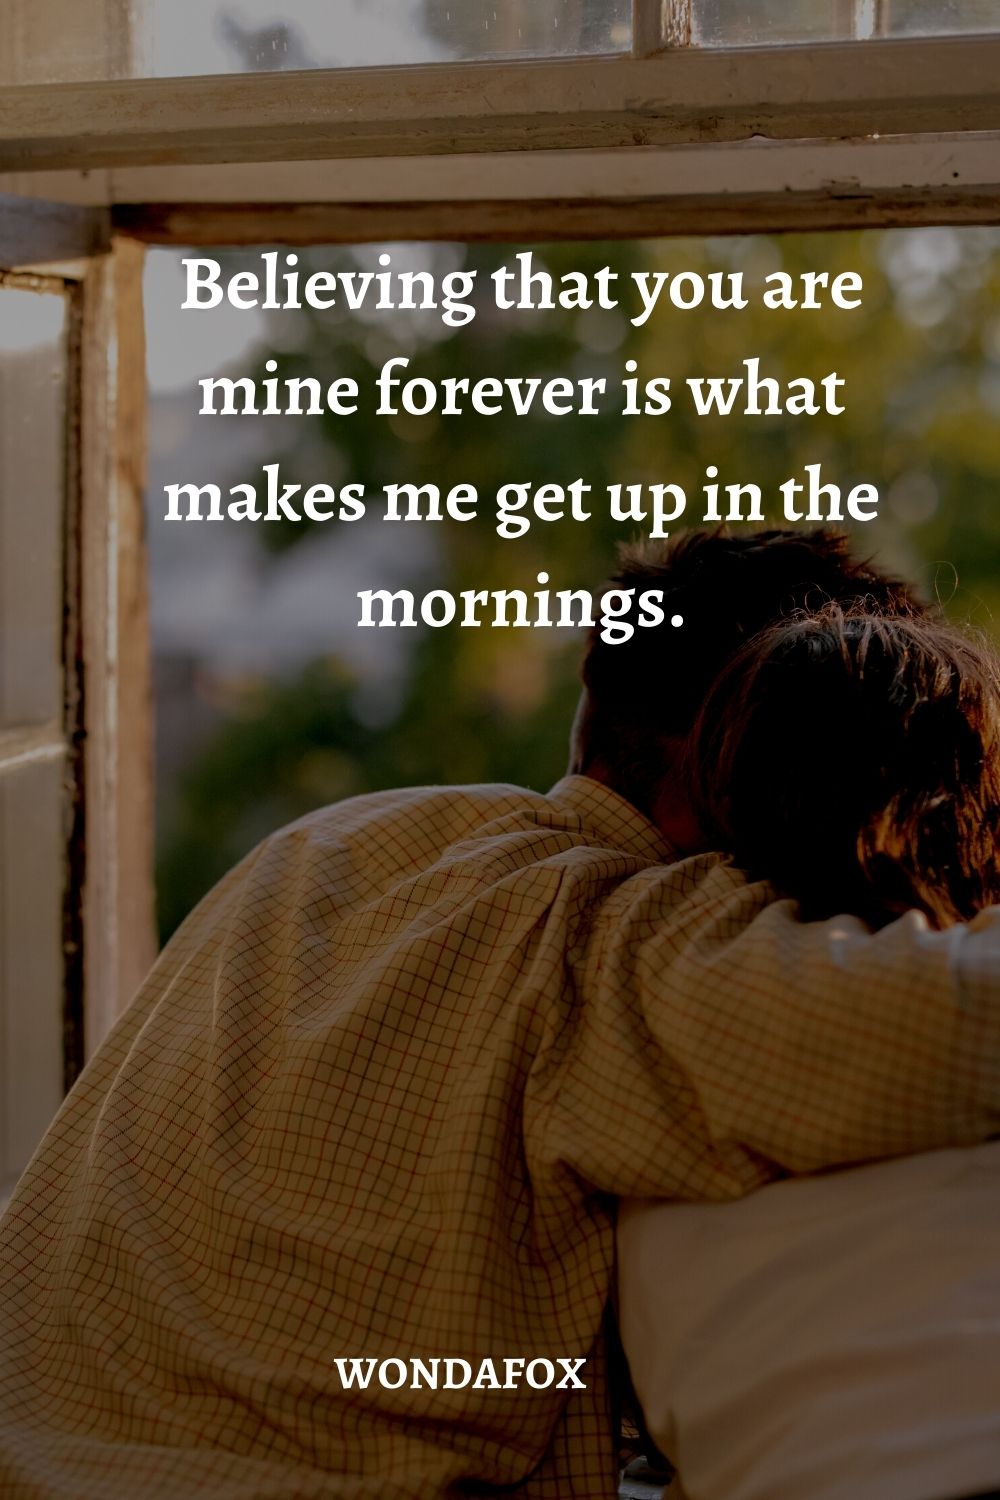 Believing that you are mine forever is what makes me get up in the mornings.